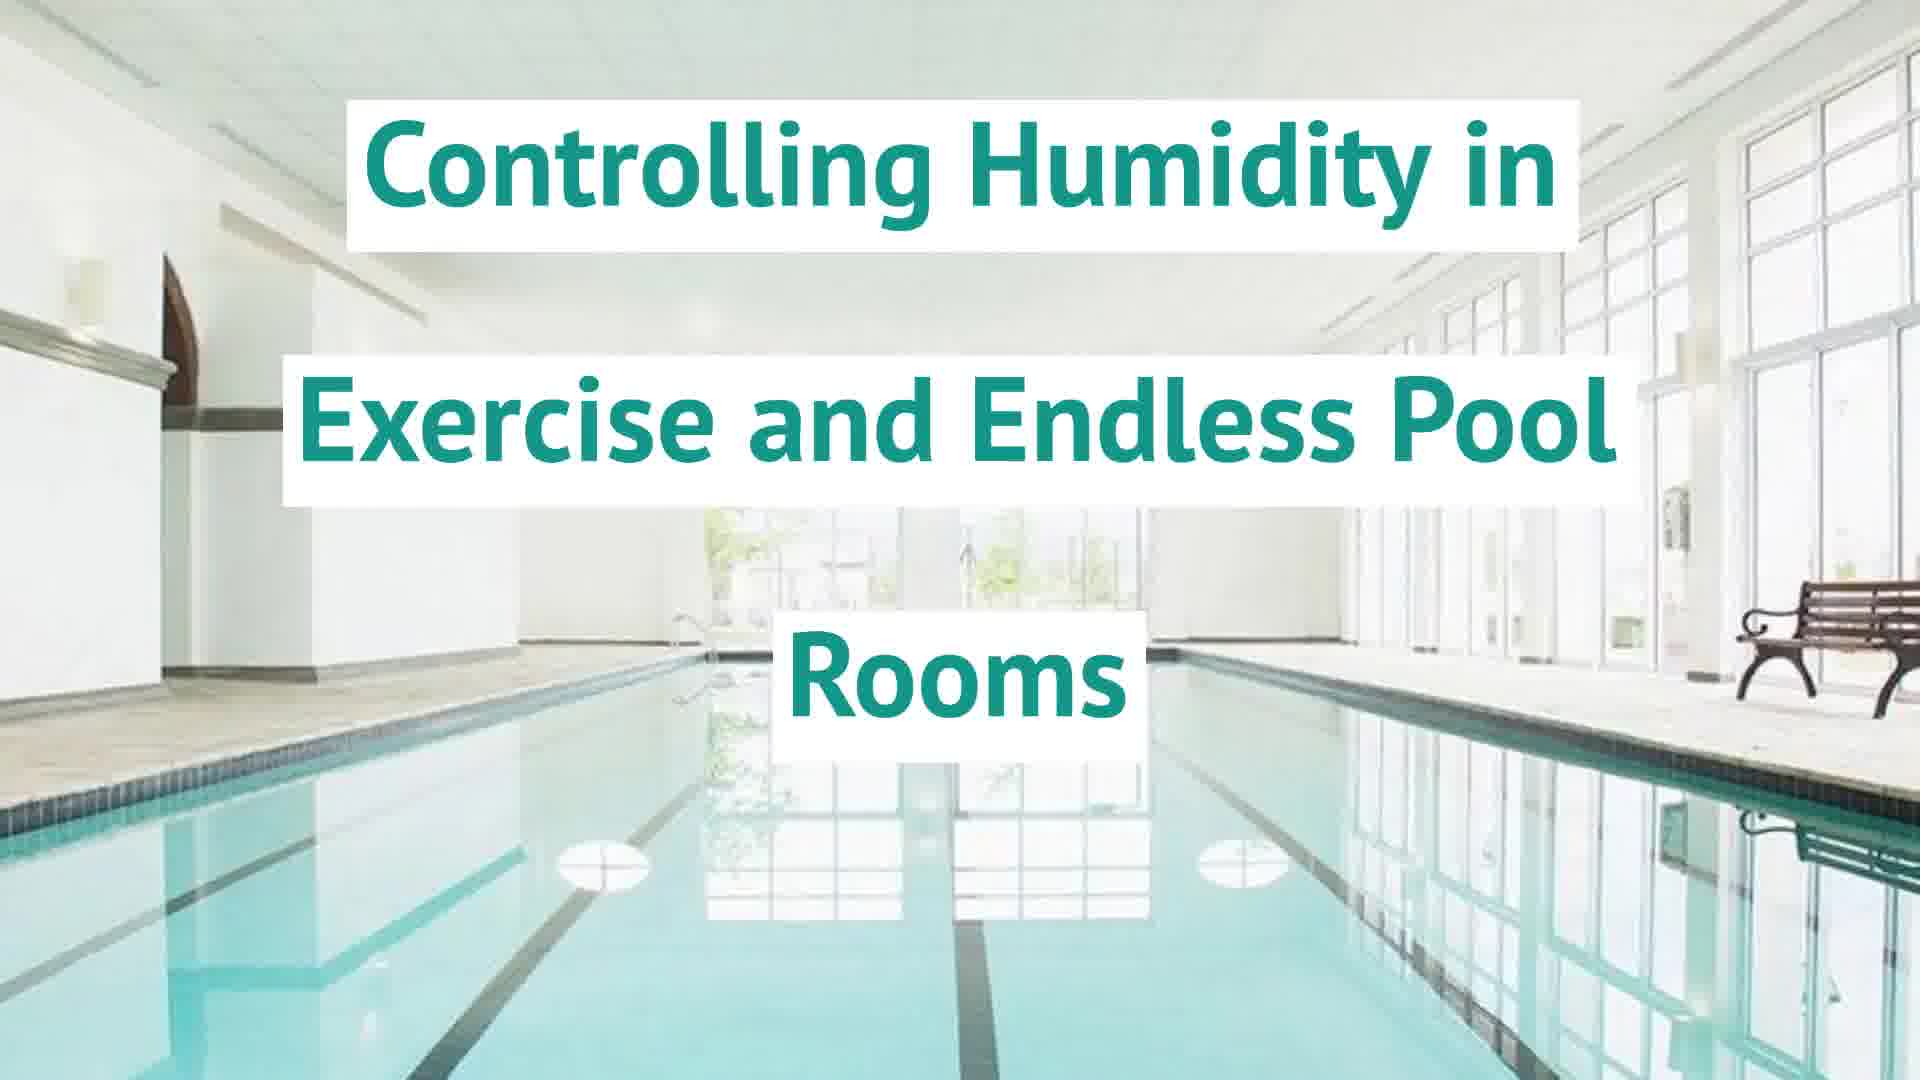 Controlling Humidity in Exercise and Endless Pool Rooms